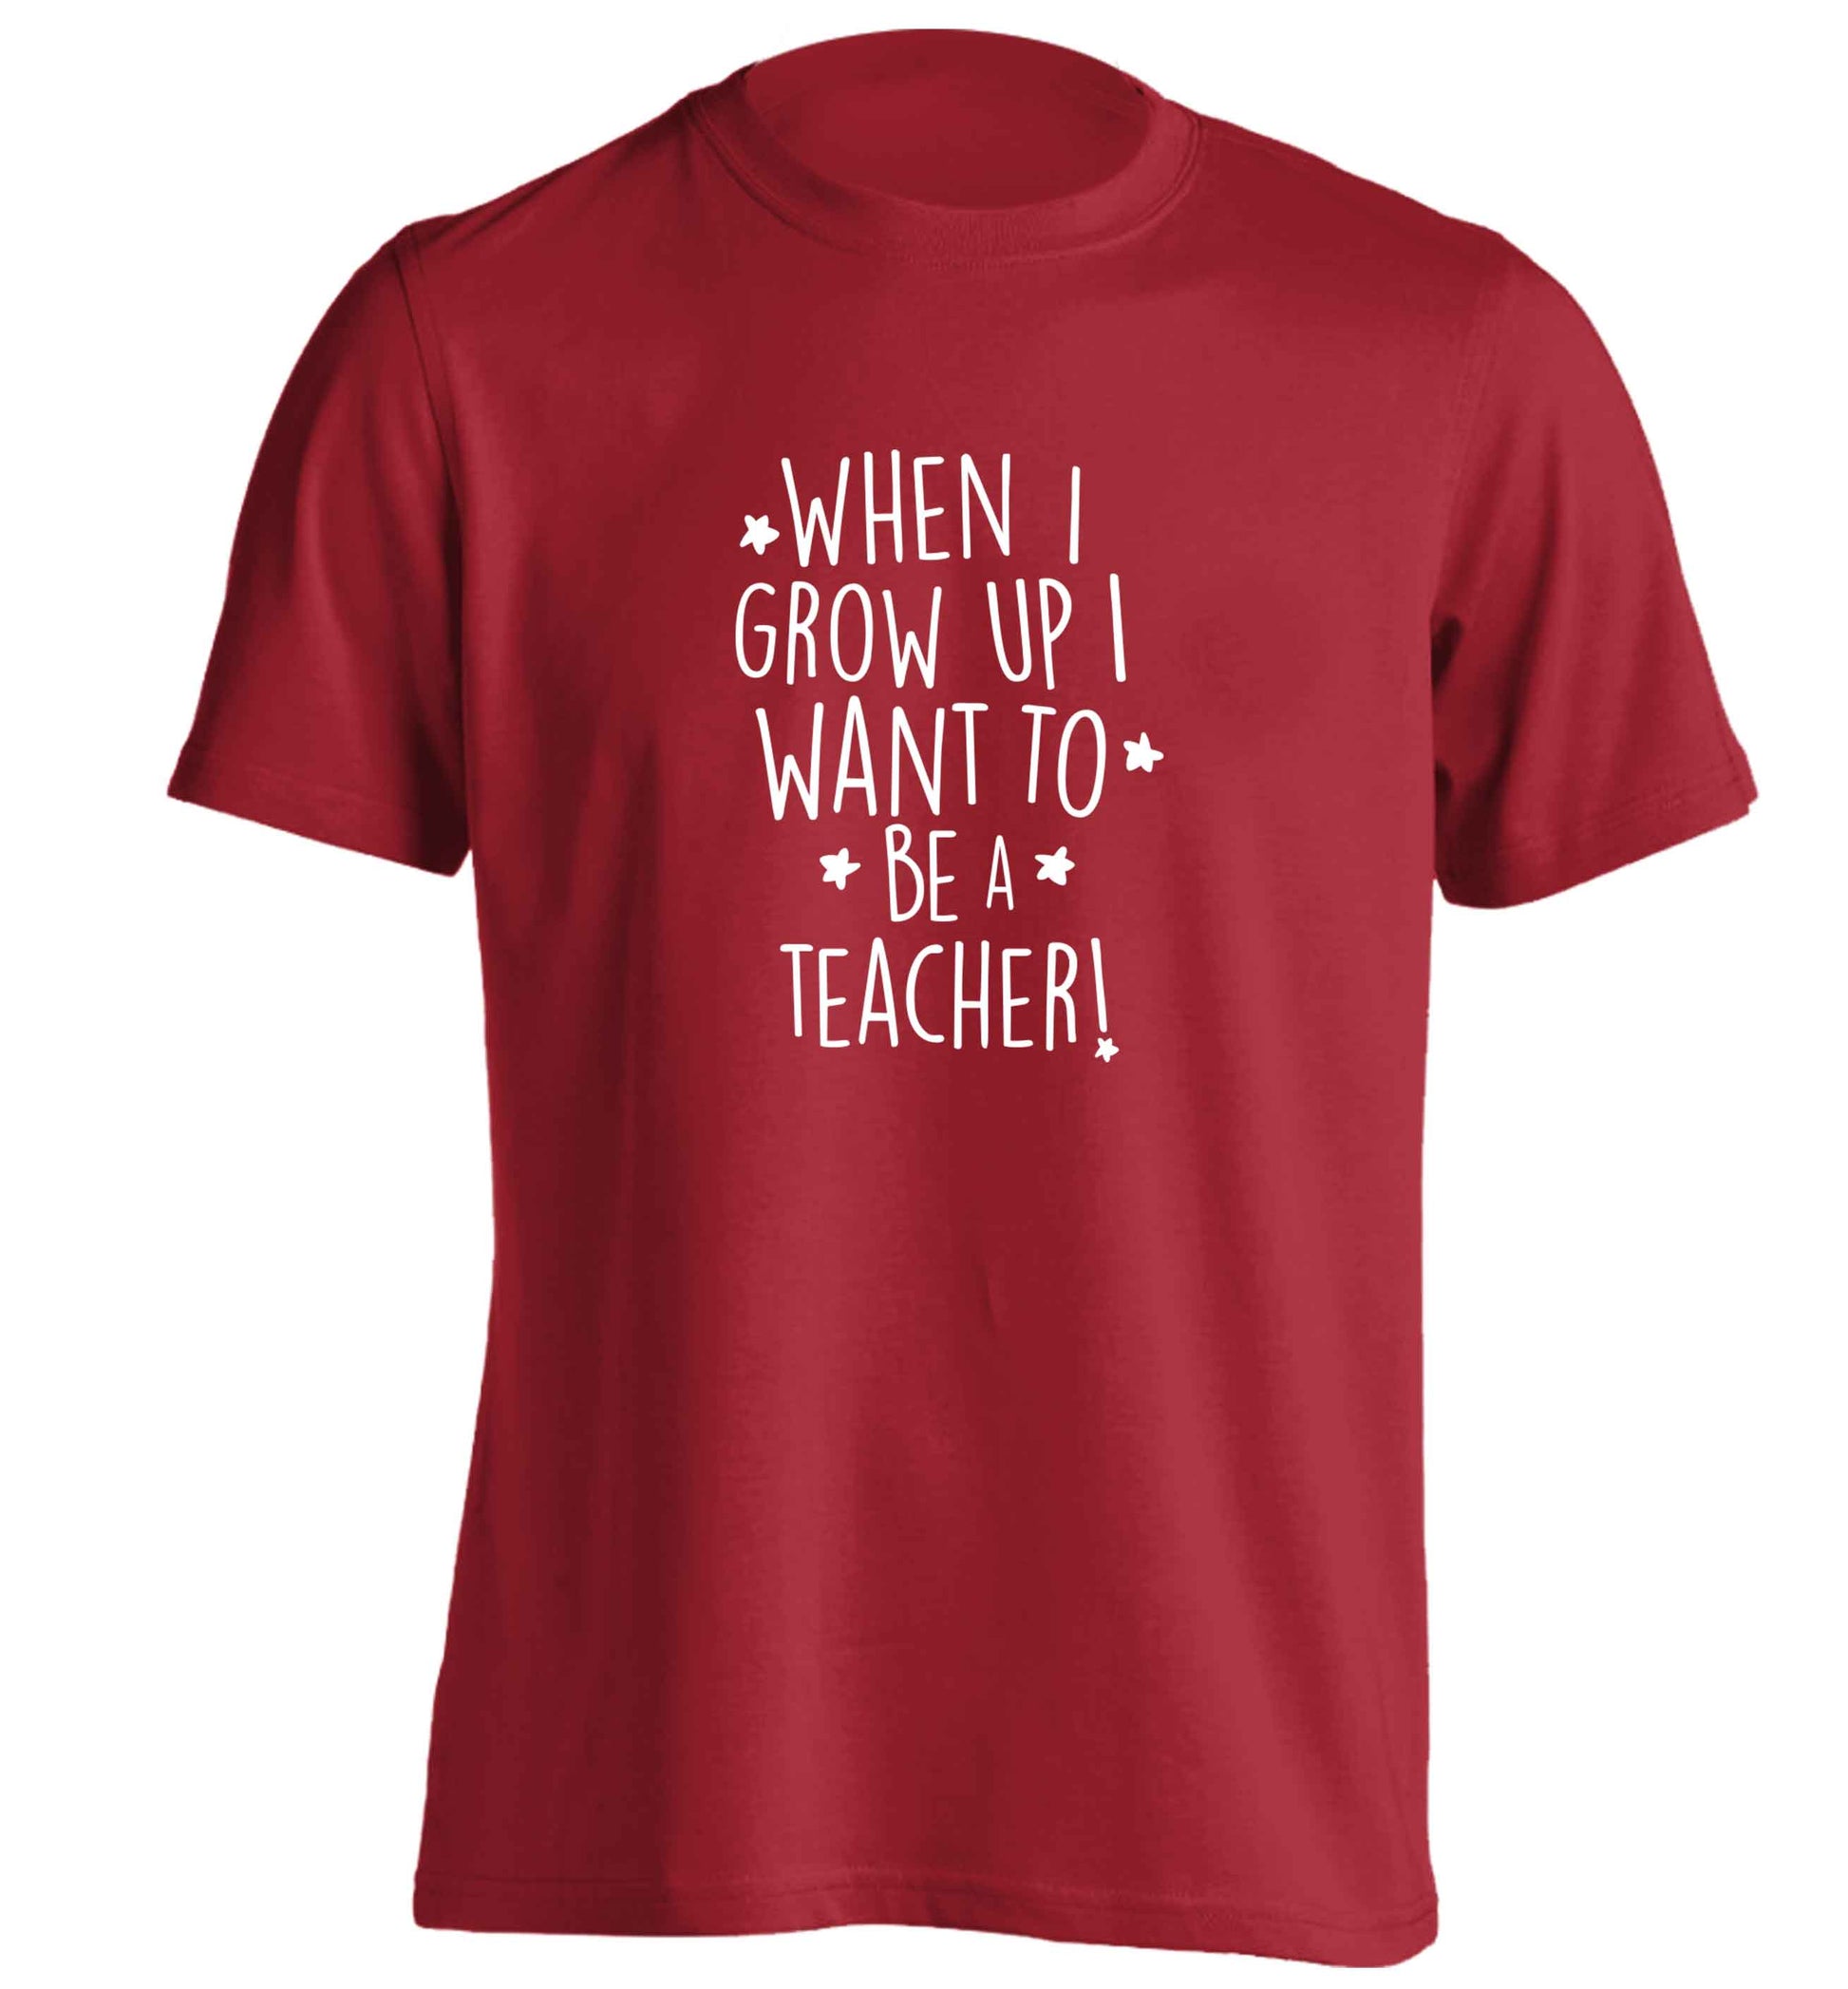 When I grow up I want to be a teacher adults unisex red Tshirt 2XL